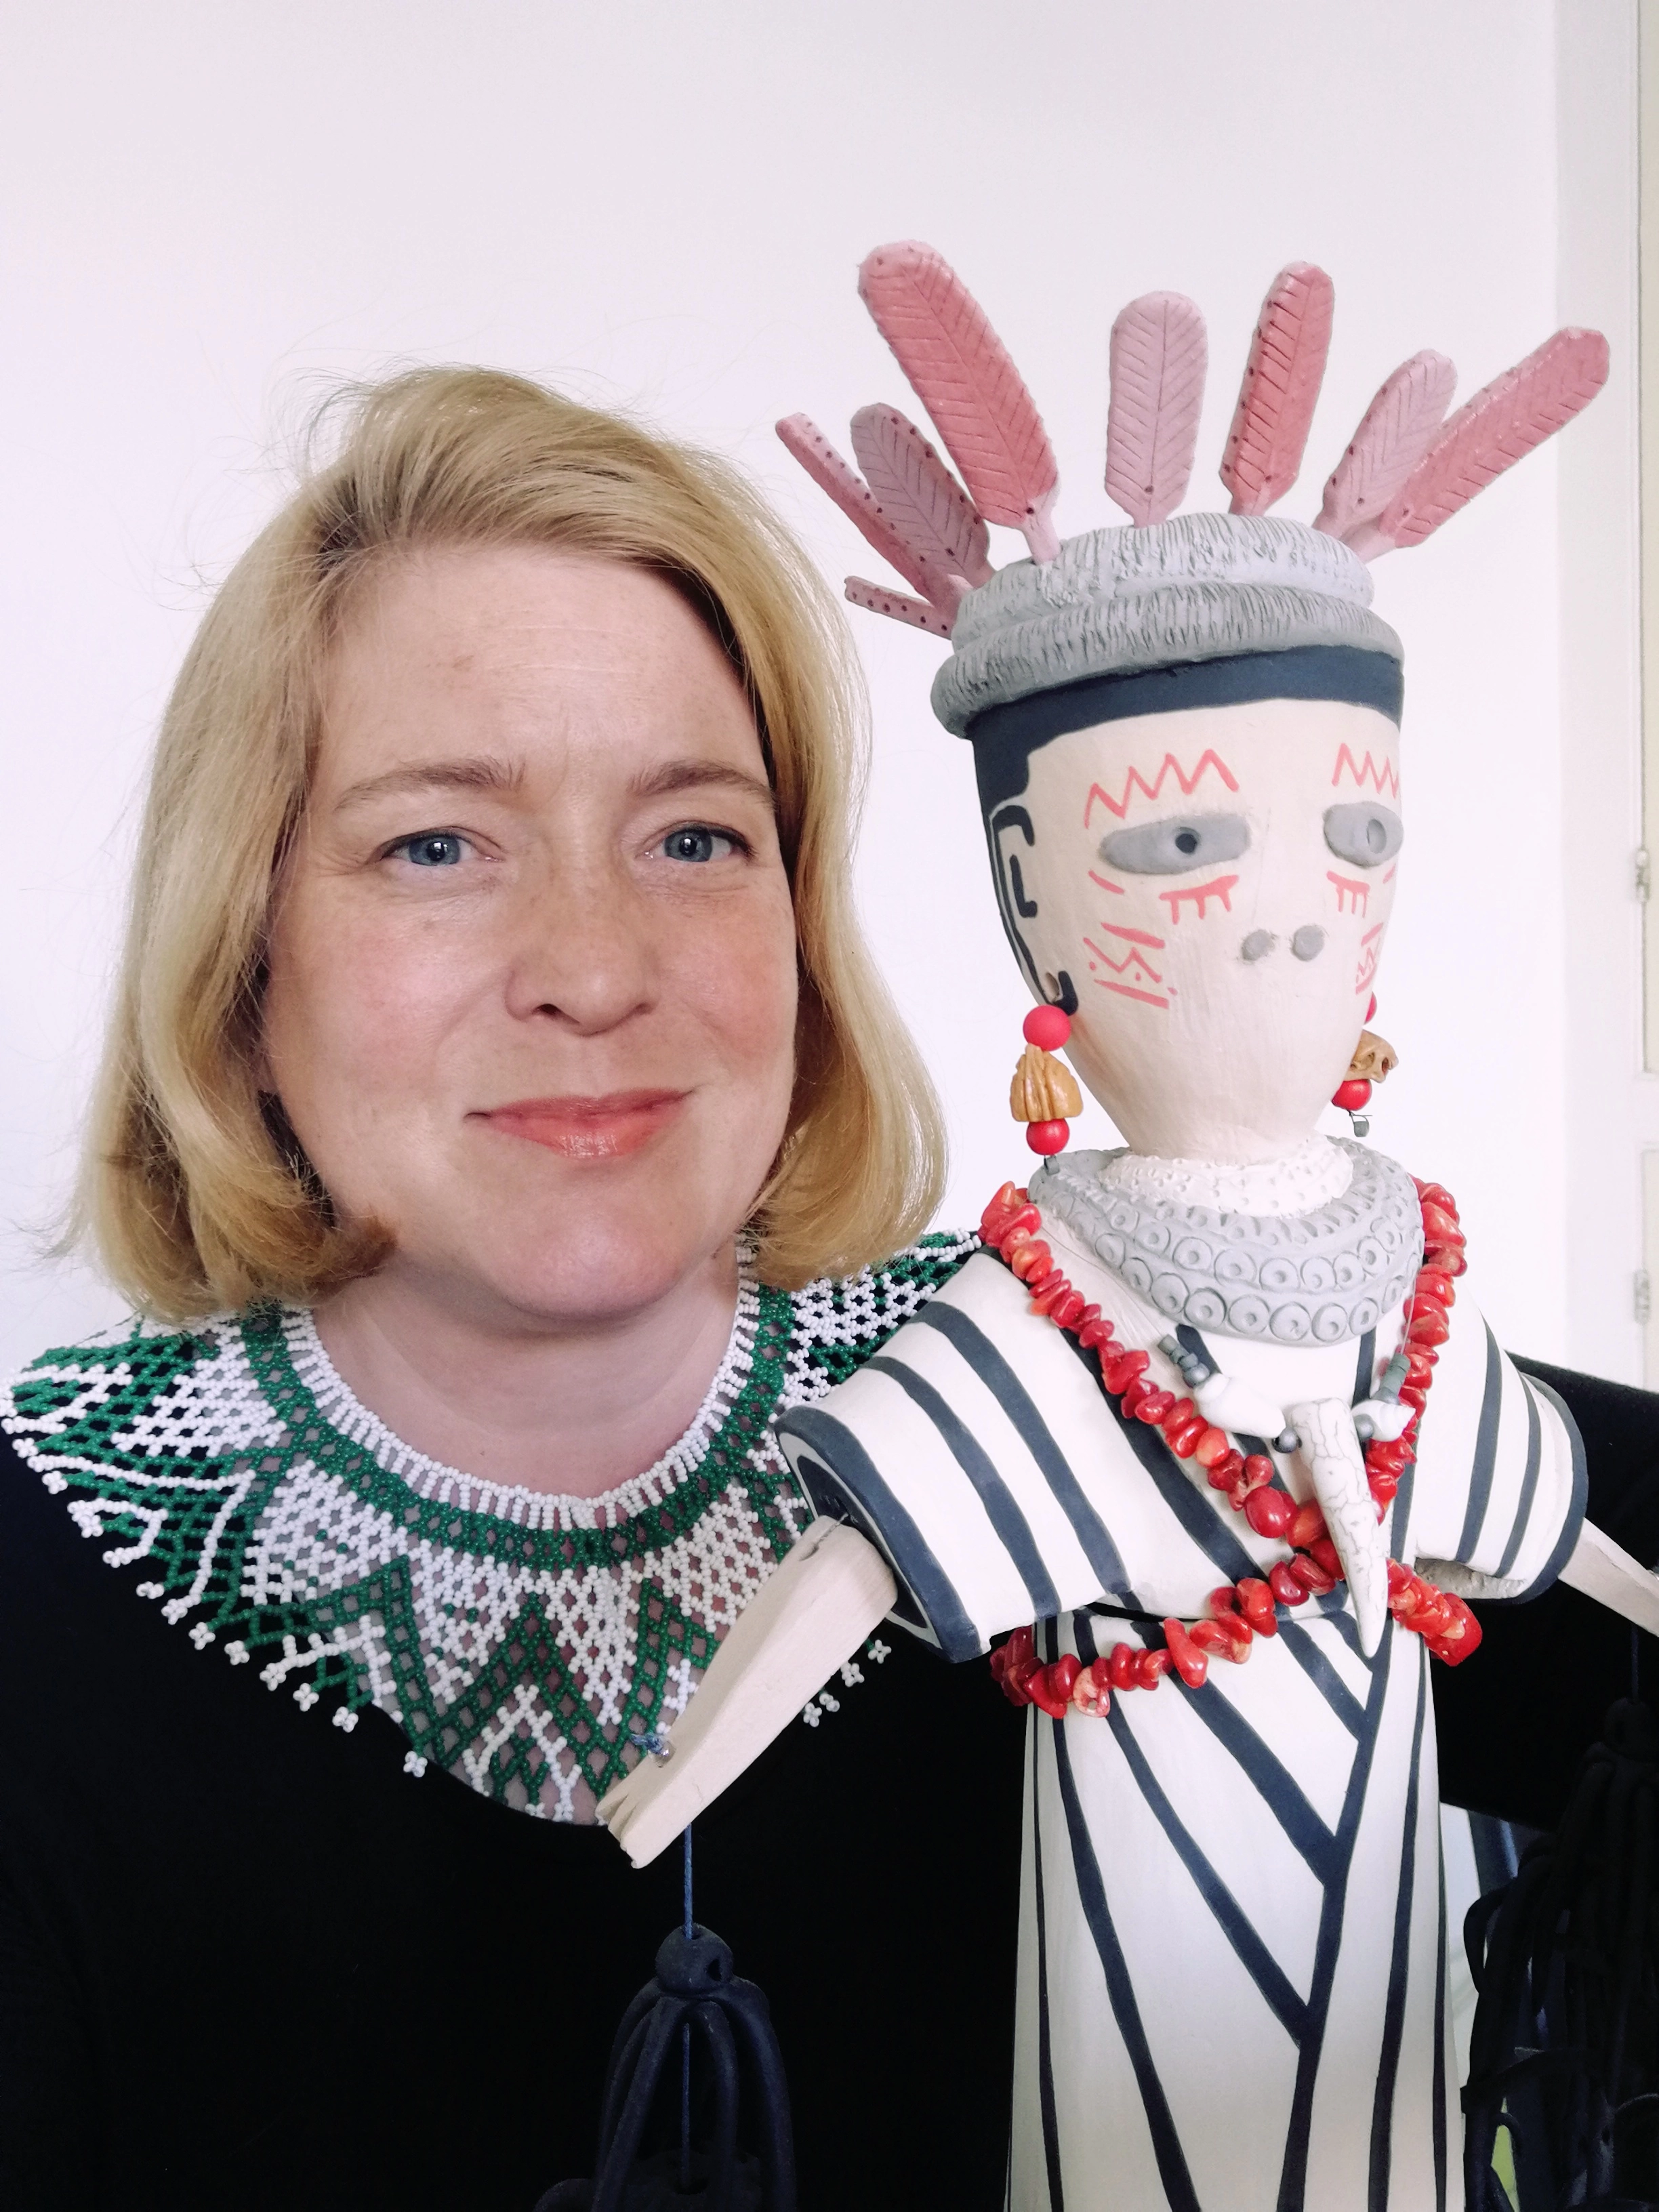 I’m Nicola and I make ceramics from earthenware clay.  I’m based in the town of Margate and I take my inspiration from anthropology, folklore, popular culture and nature.  I’m very lucky to have an array of museums and attractions nearby that help inspire my creations, along with the amazing and varied shorelines and vistas we have here in Thanet.  All my pieces are lovingly made and painted by hand, in small batches. Each piece is unique.